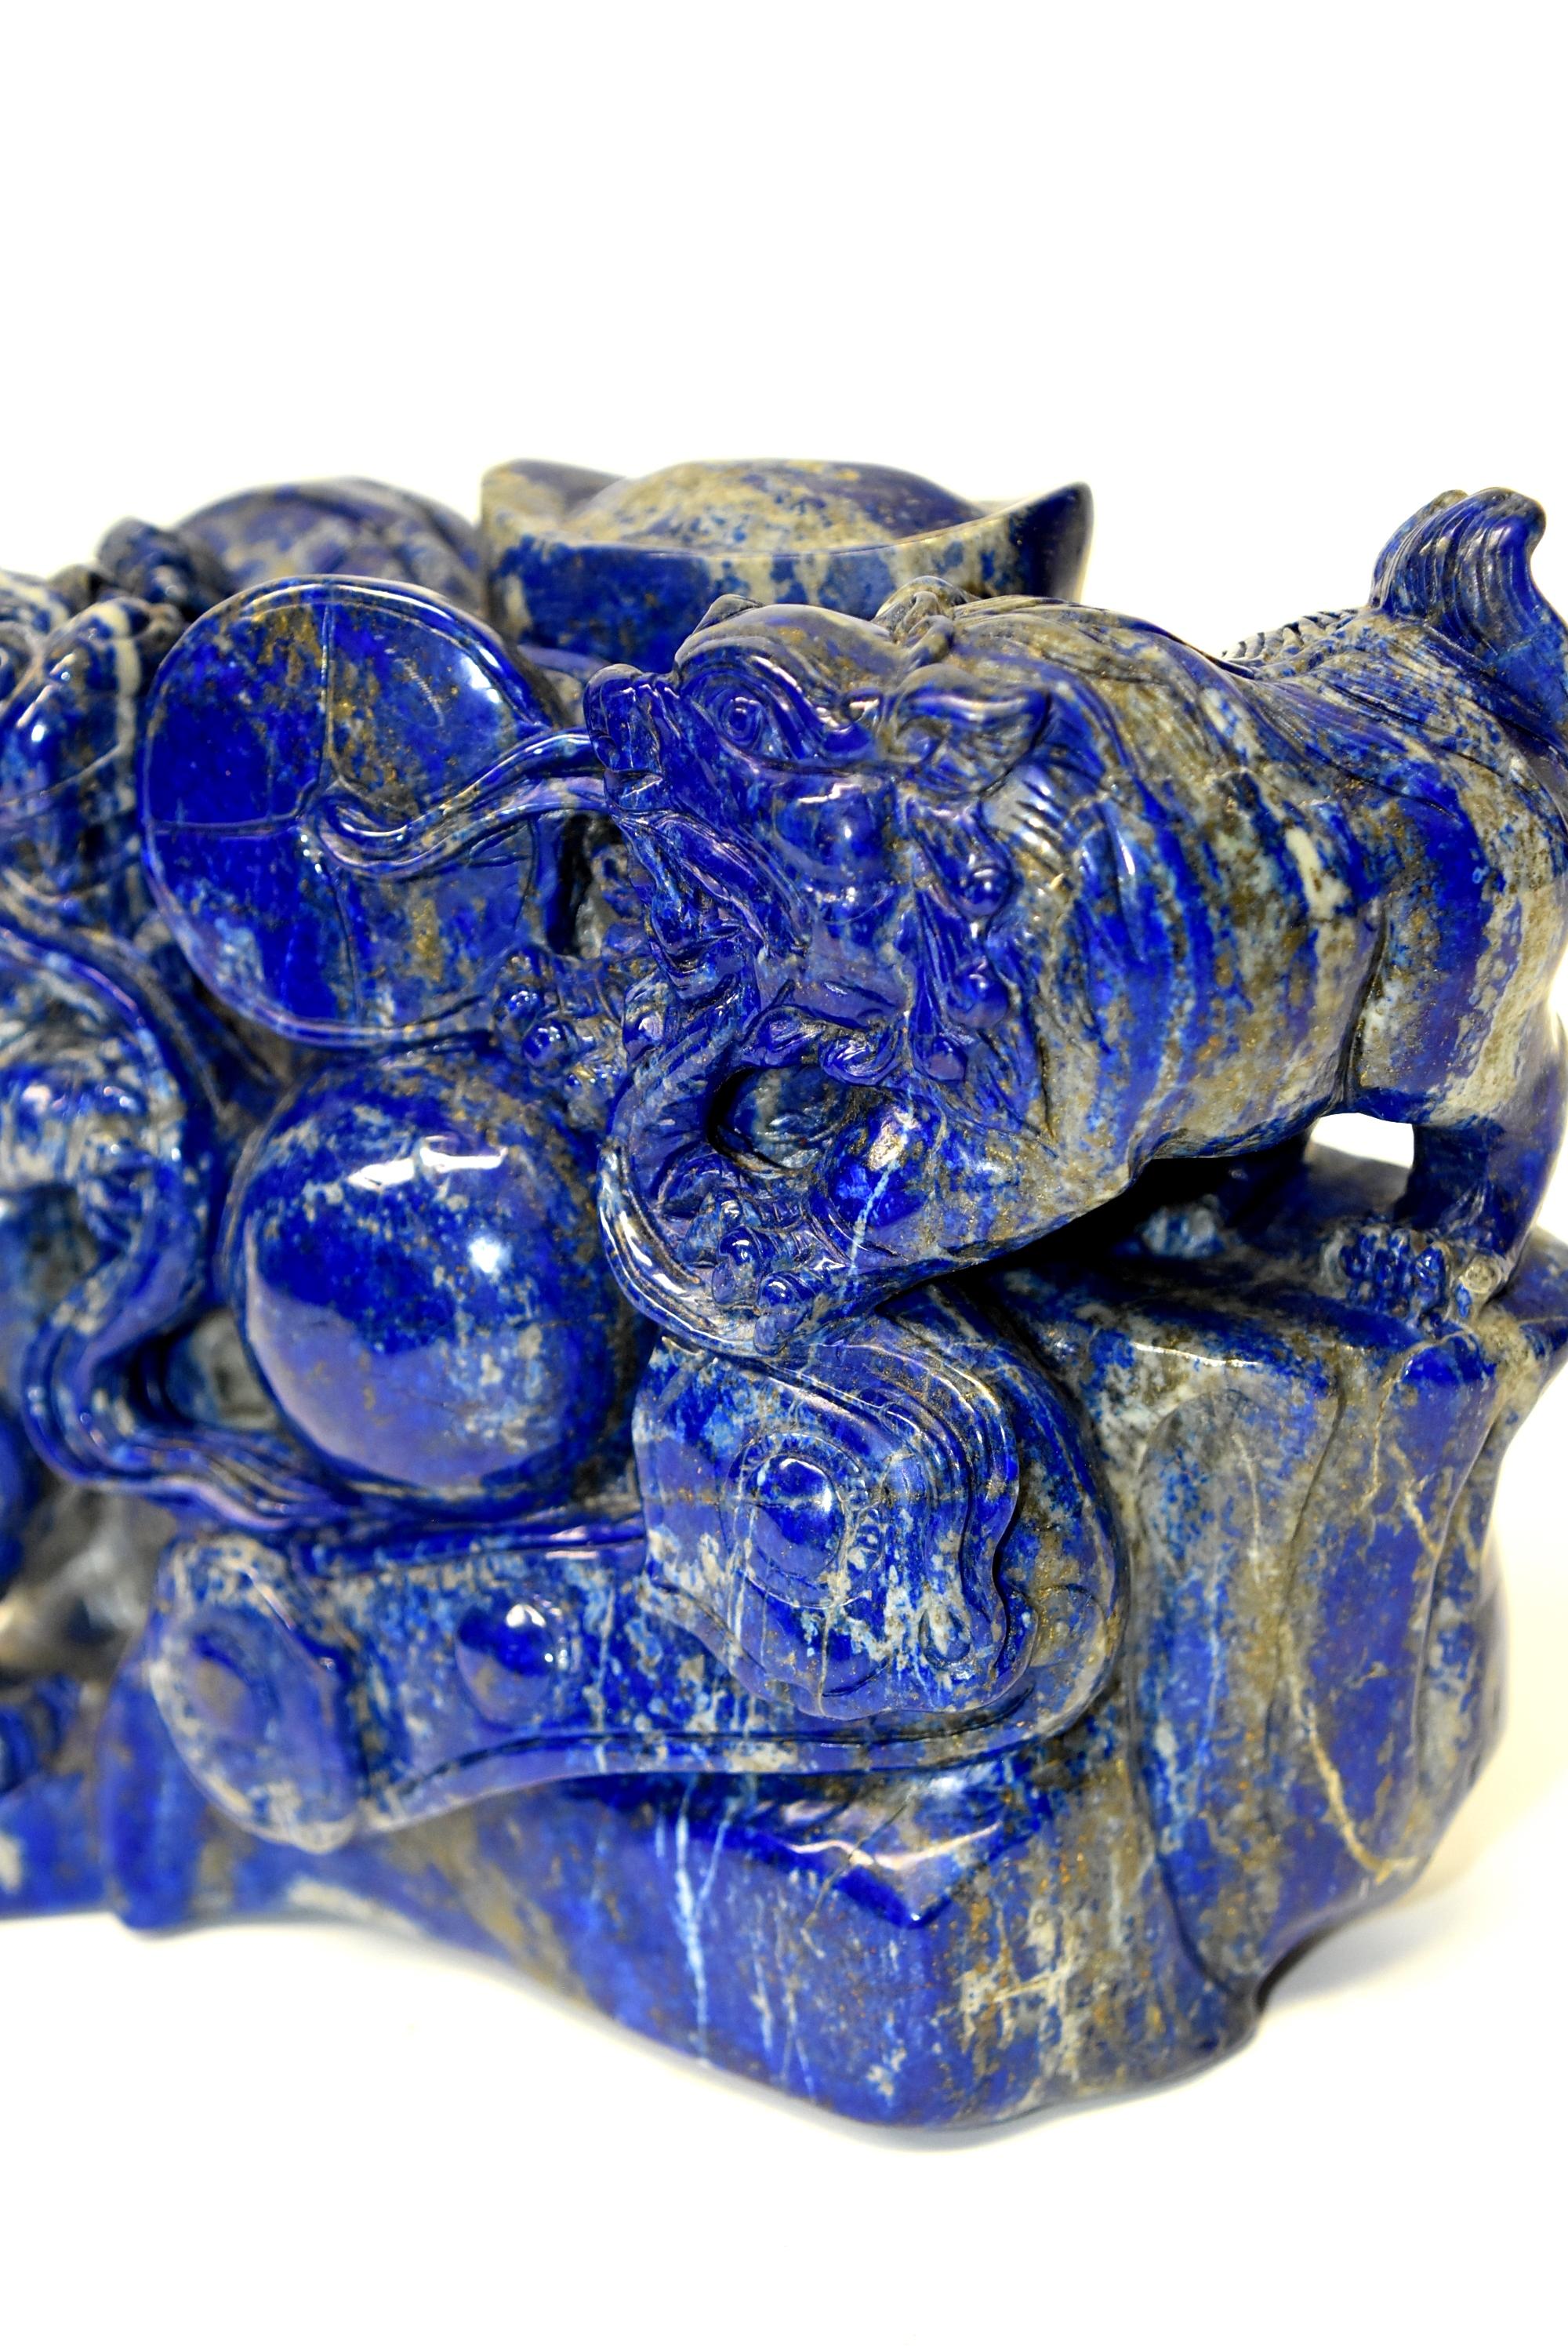 Natural Lapis Lazuli 8 lb Block with Carved Lions 1